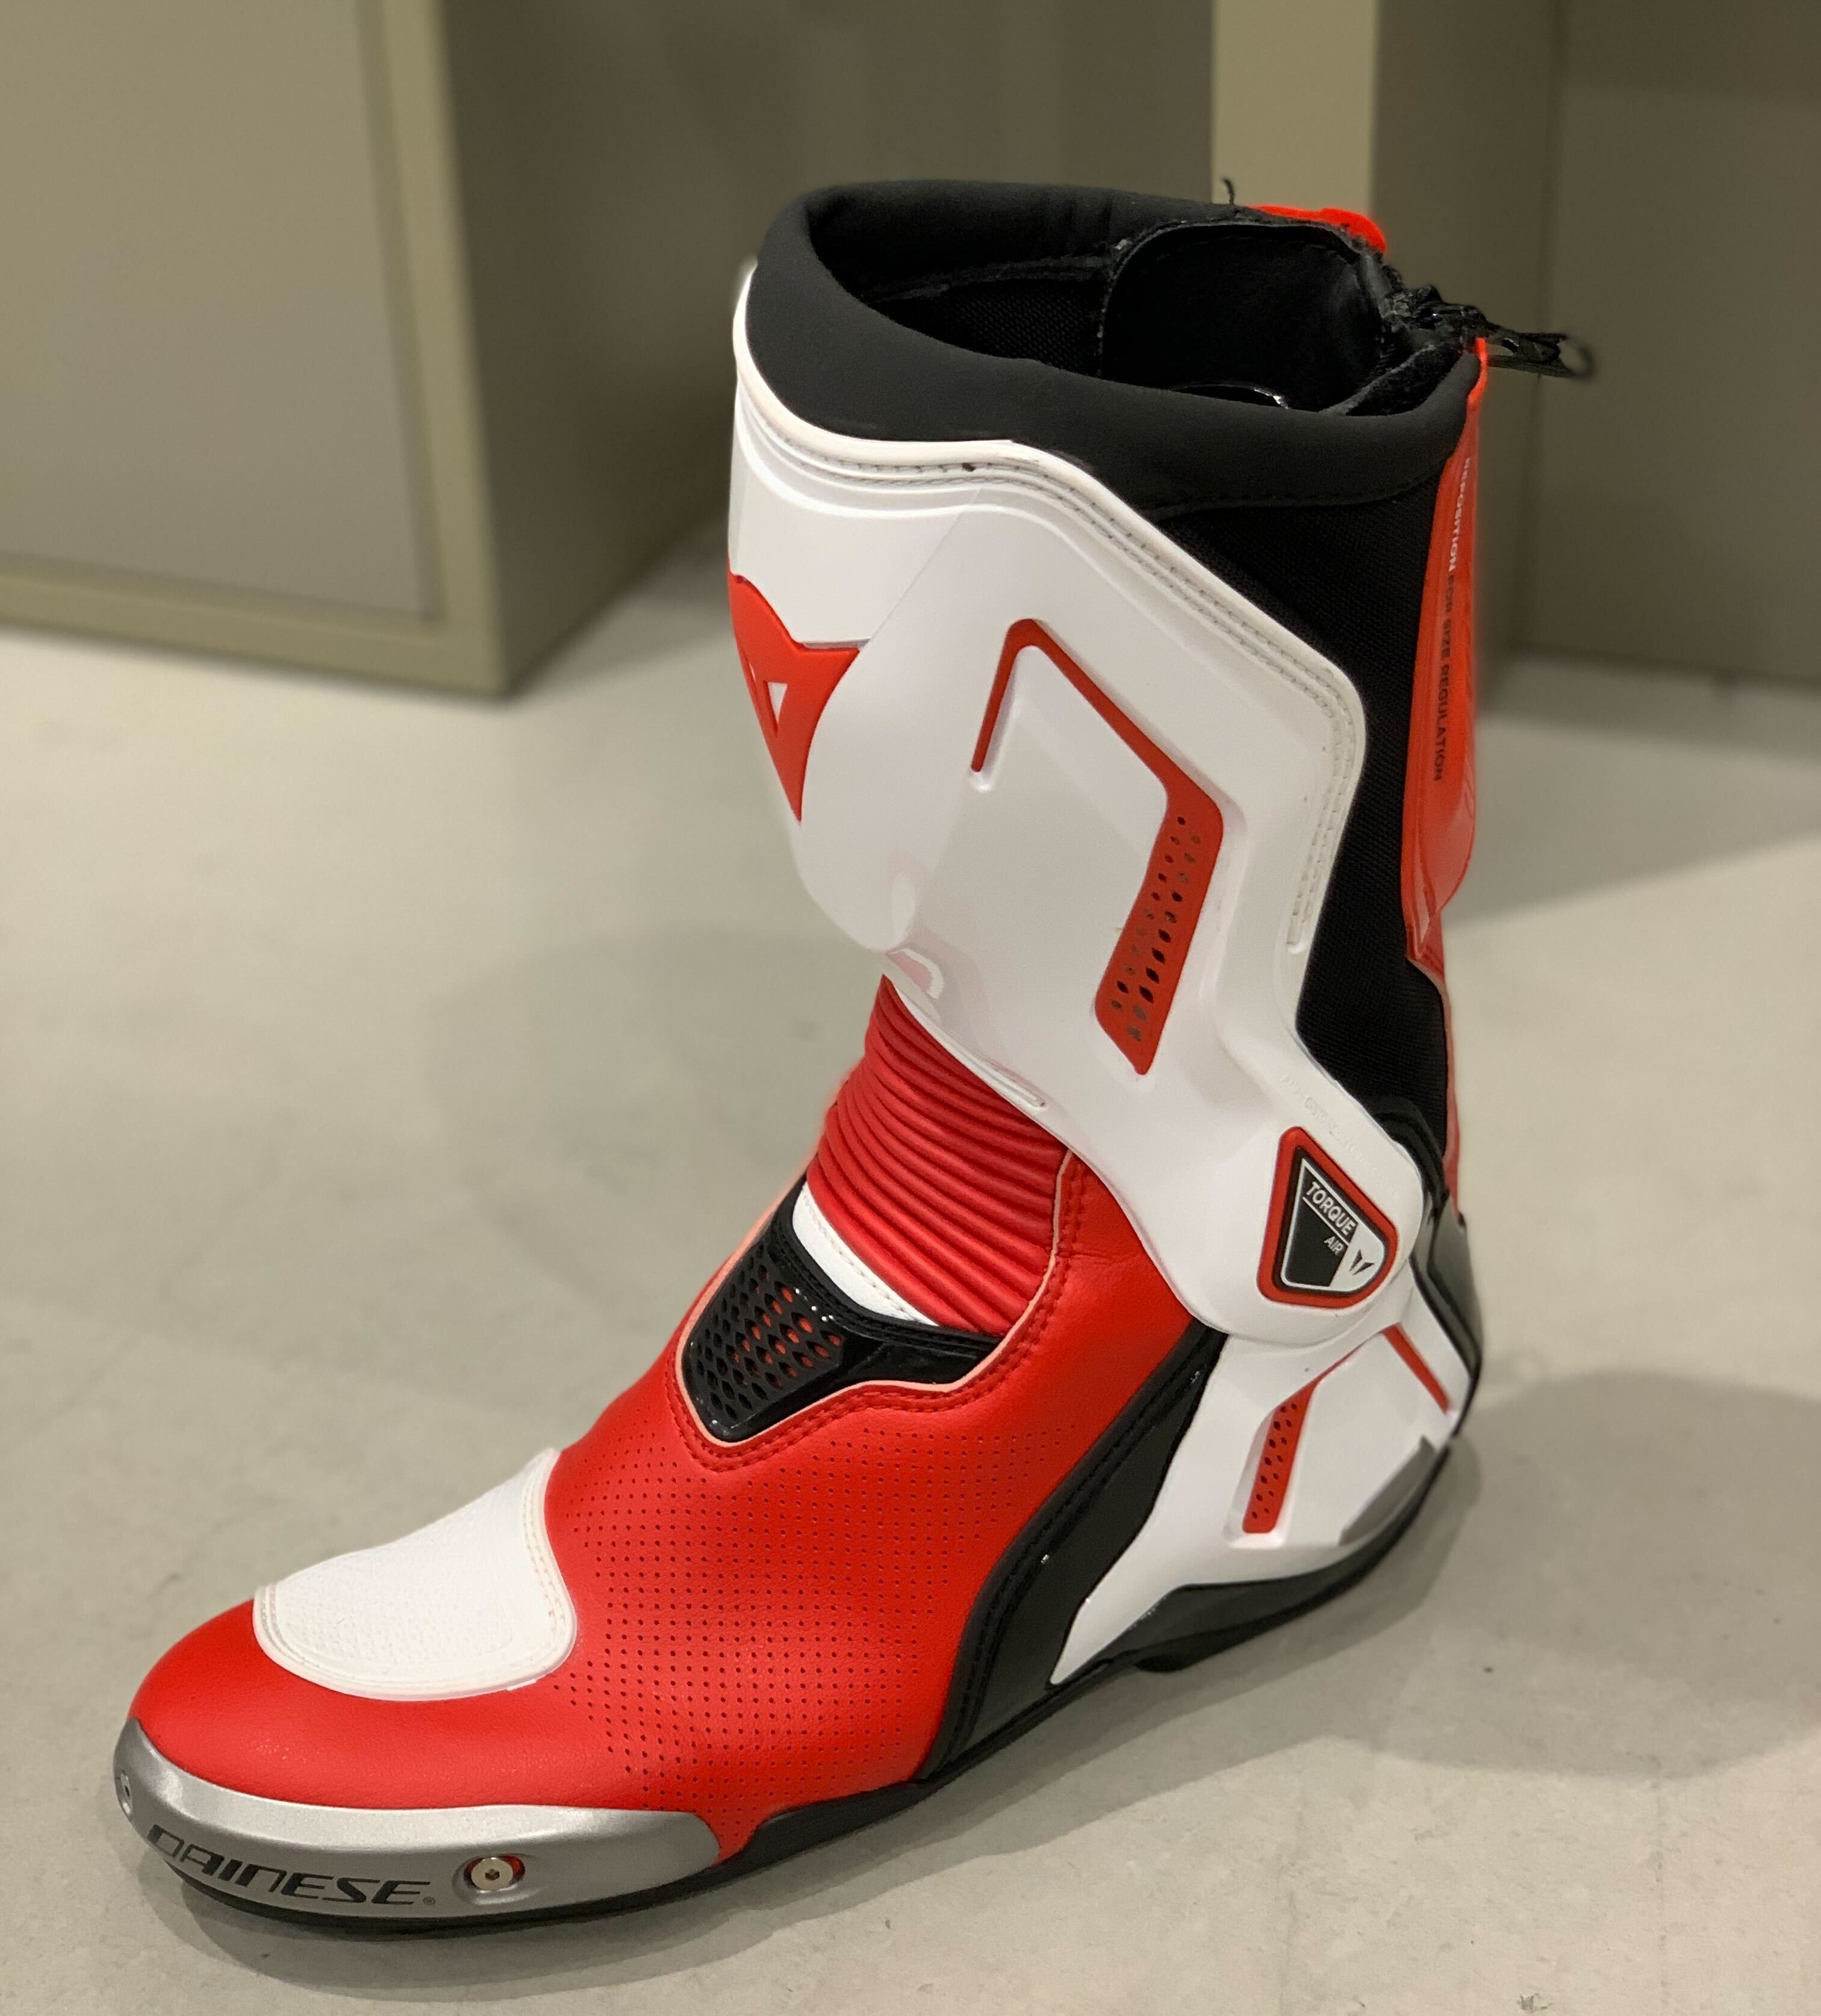 OUTブーツの最高峰「TORQUE 3 OUT BOOTS」のご紹介